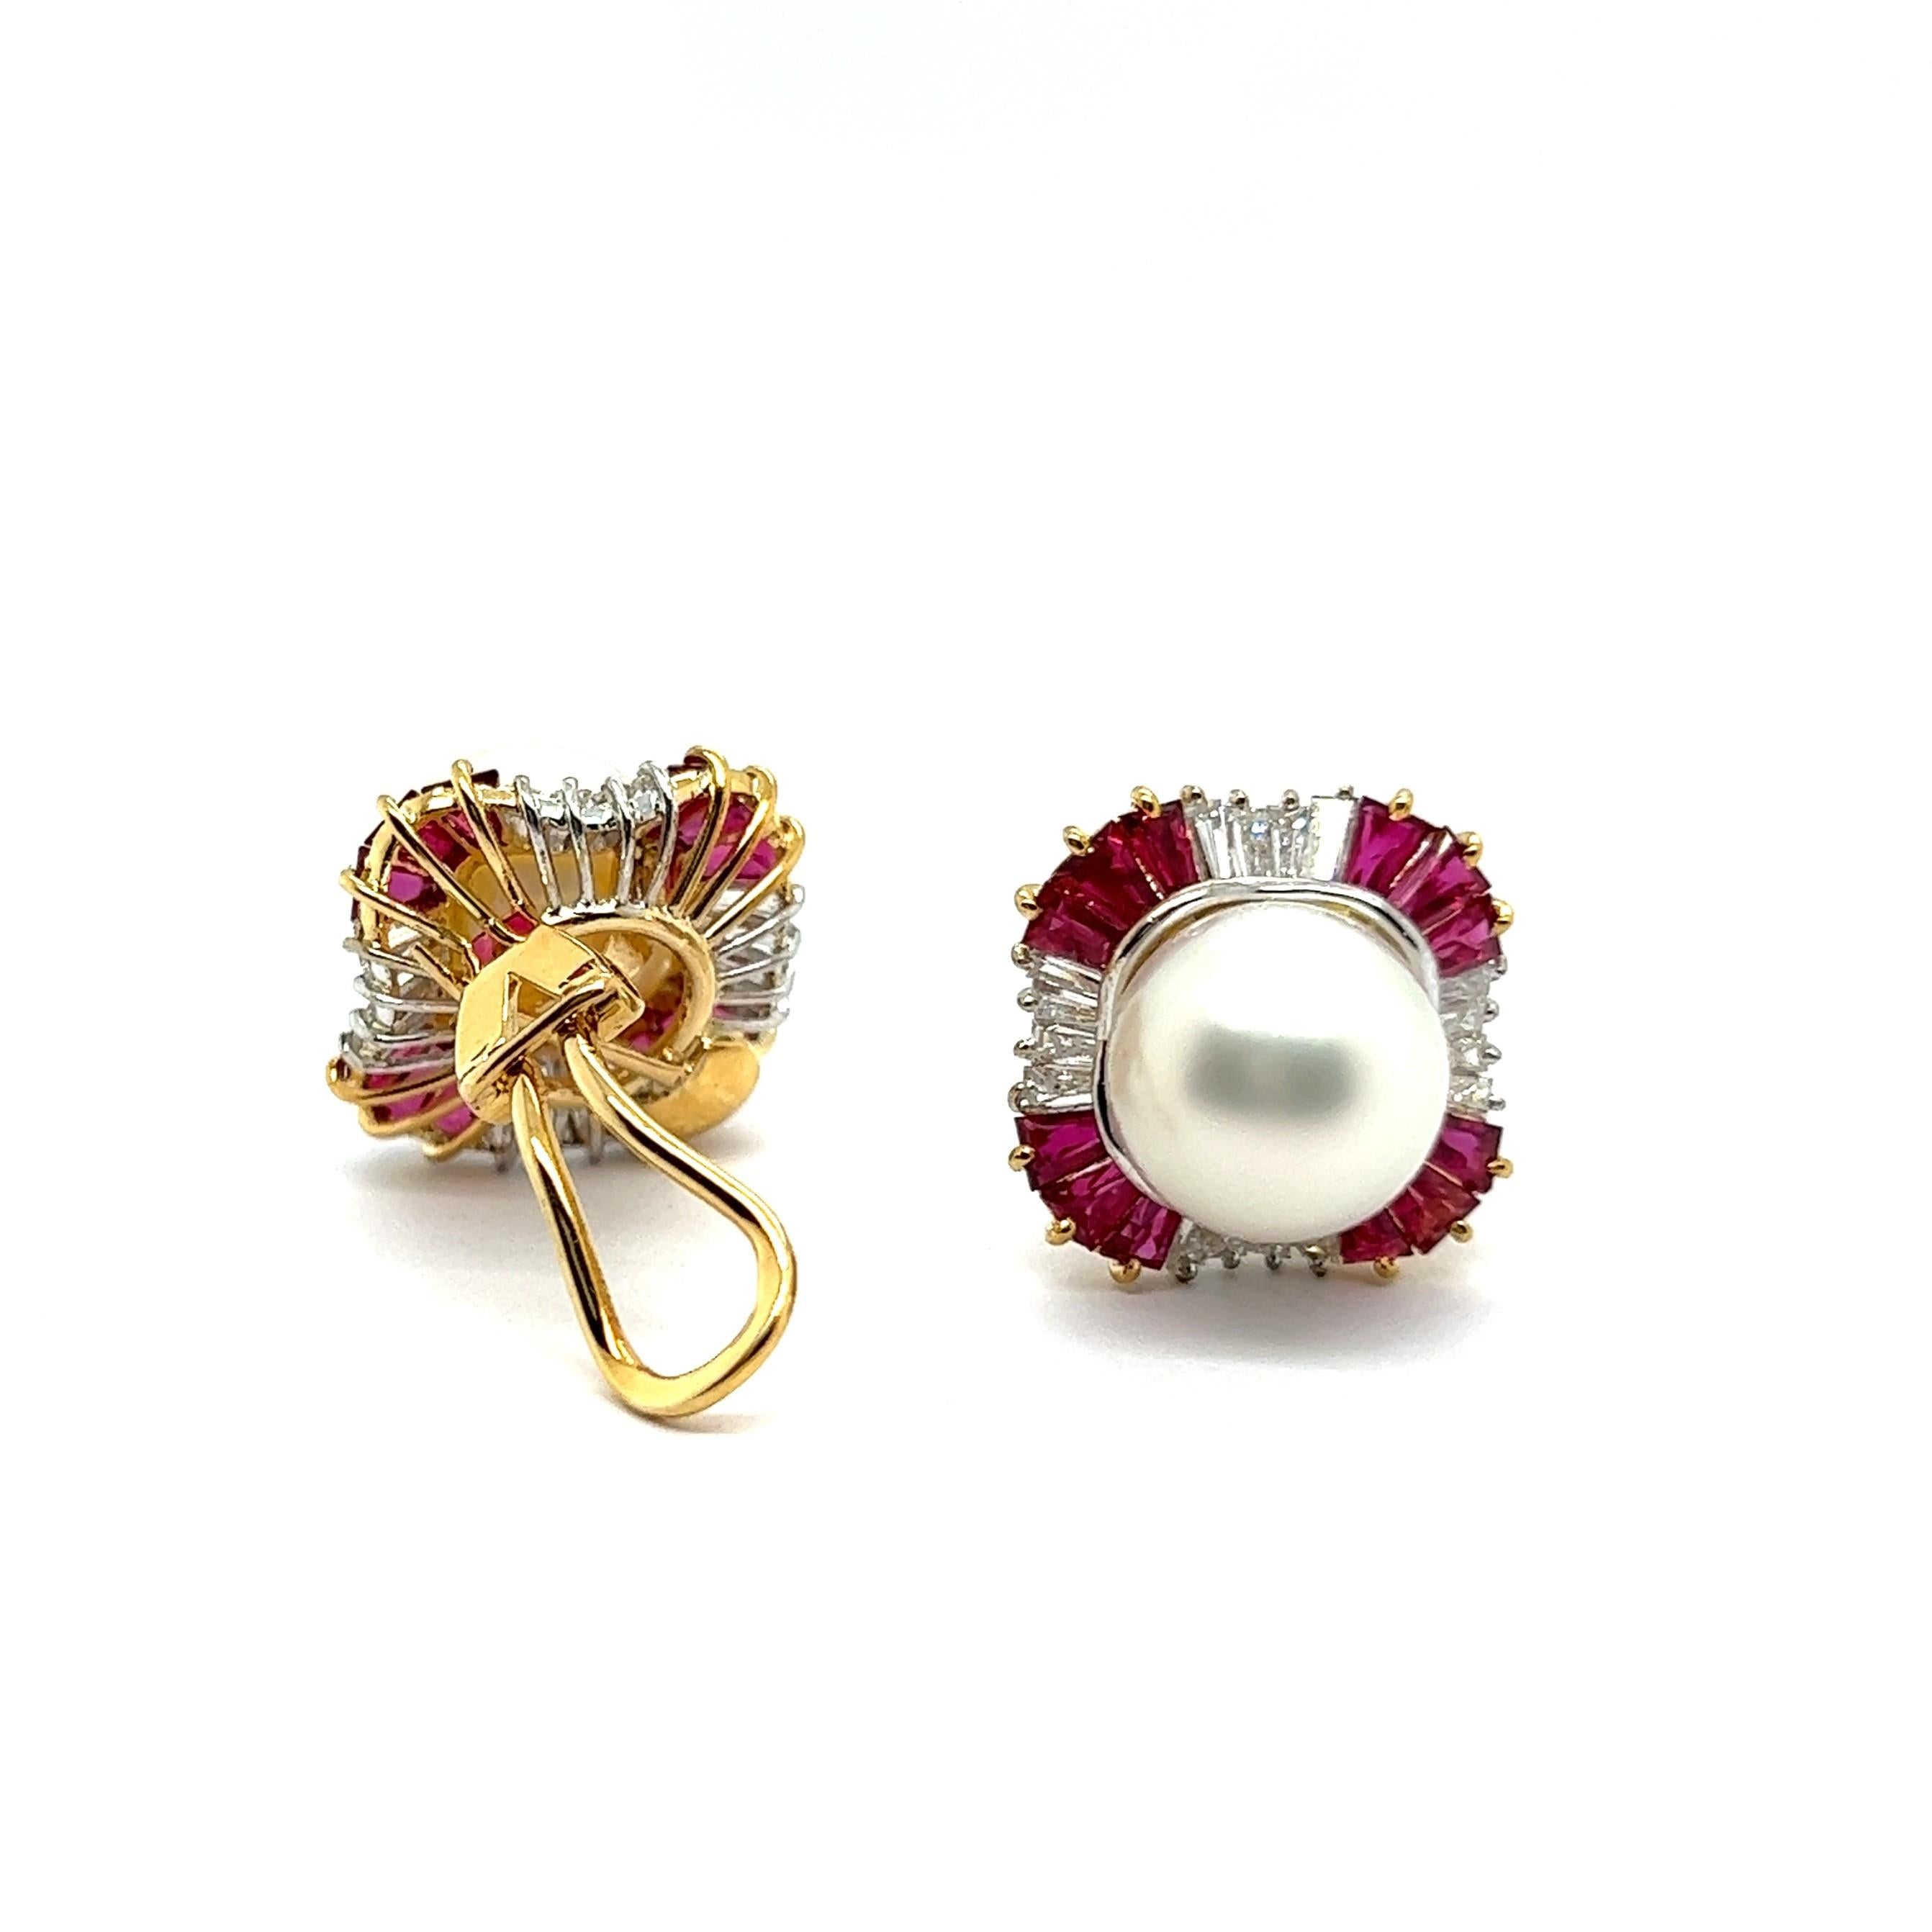 Clip-on Earrings with Pearls, Rubies & Diamonds in 18 Karat Yellow & White Gold For Sale 3